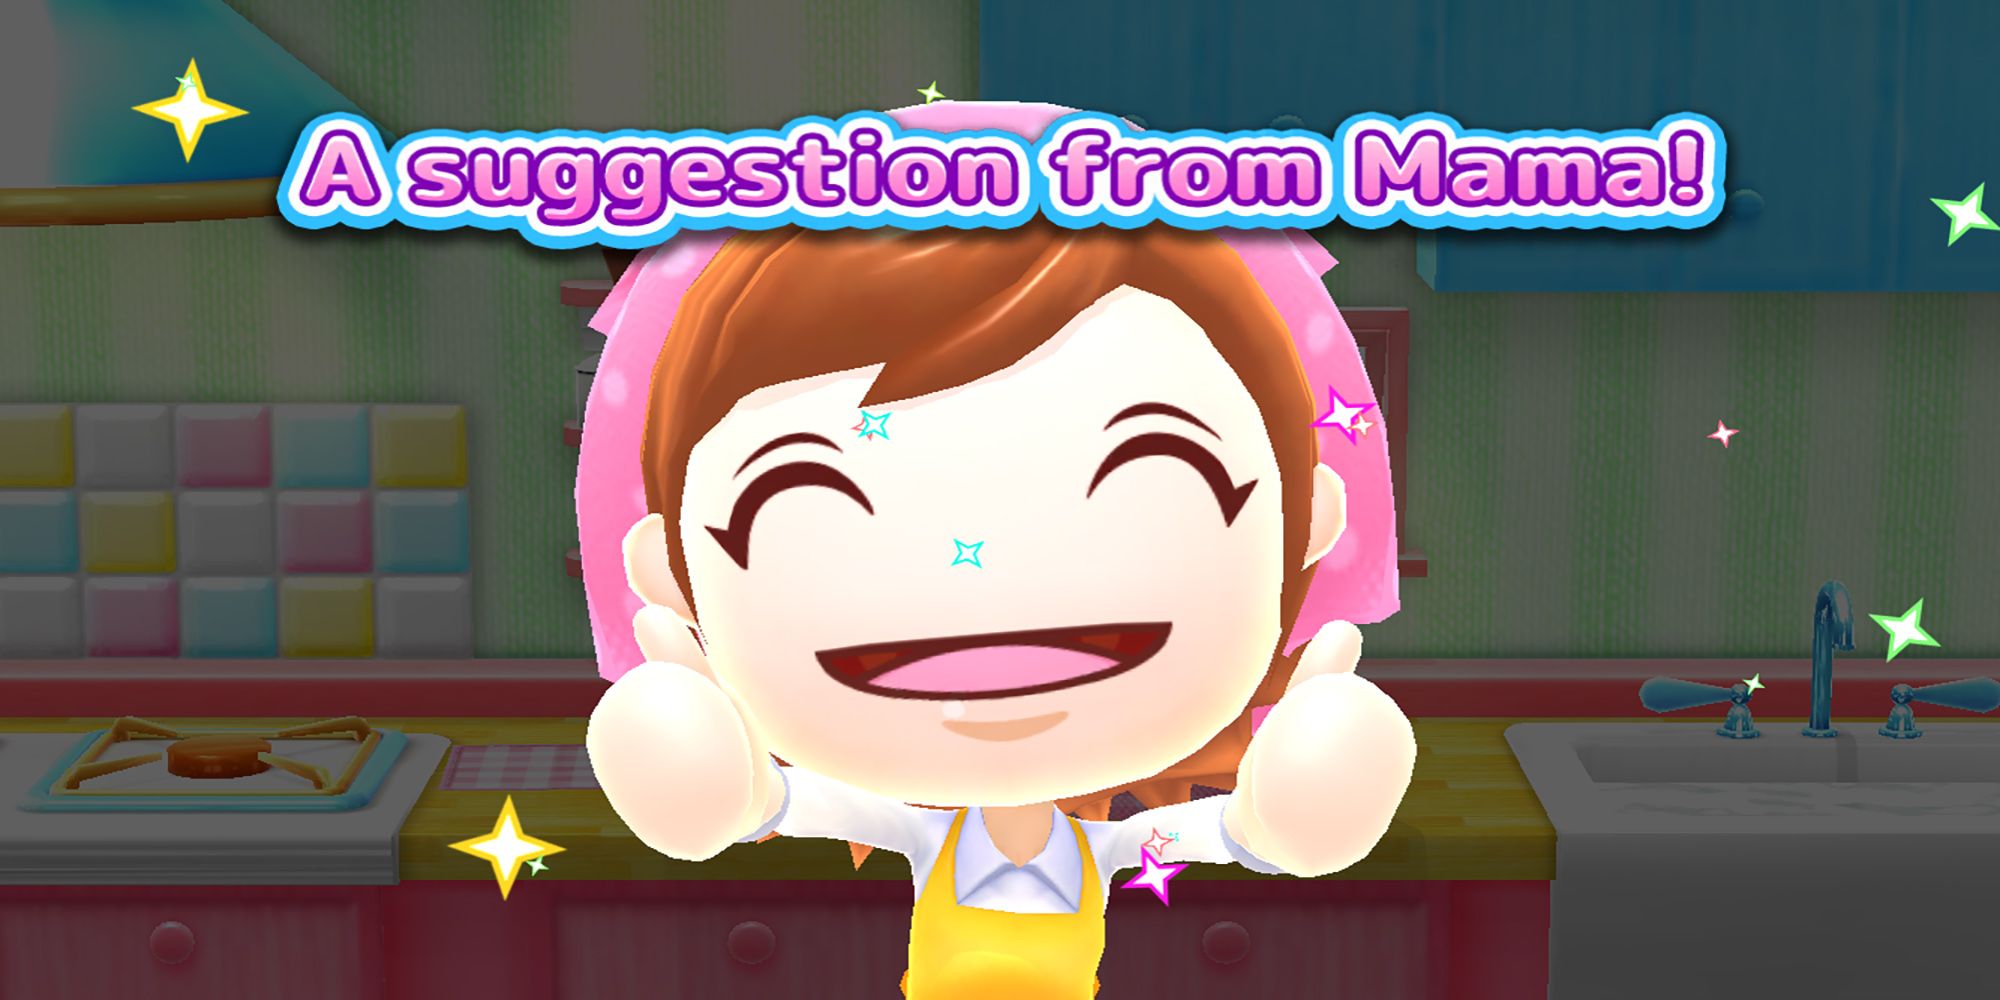 Cooking Mama offers you a fun suggestion for your chili dish in Cooking Mama: Cuisine!